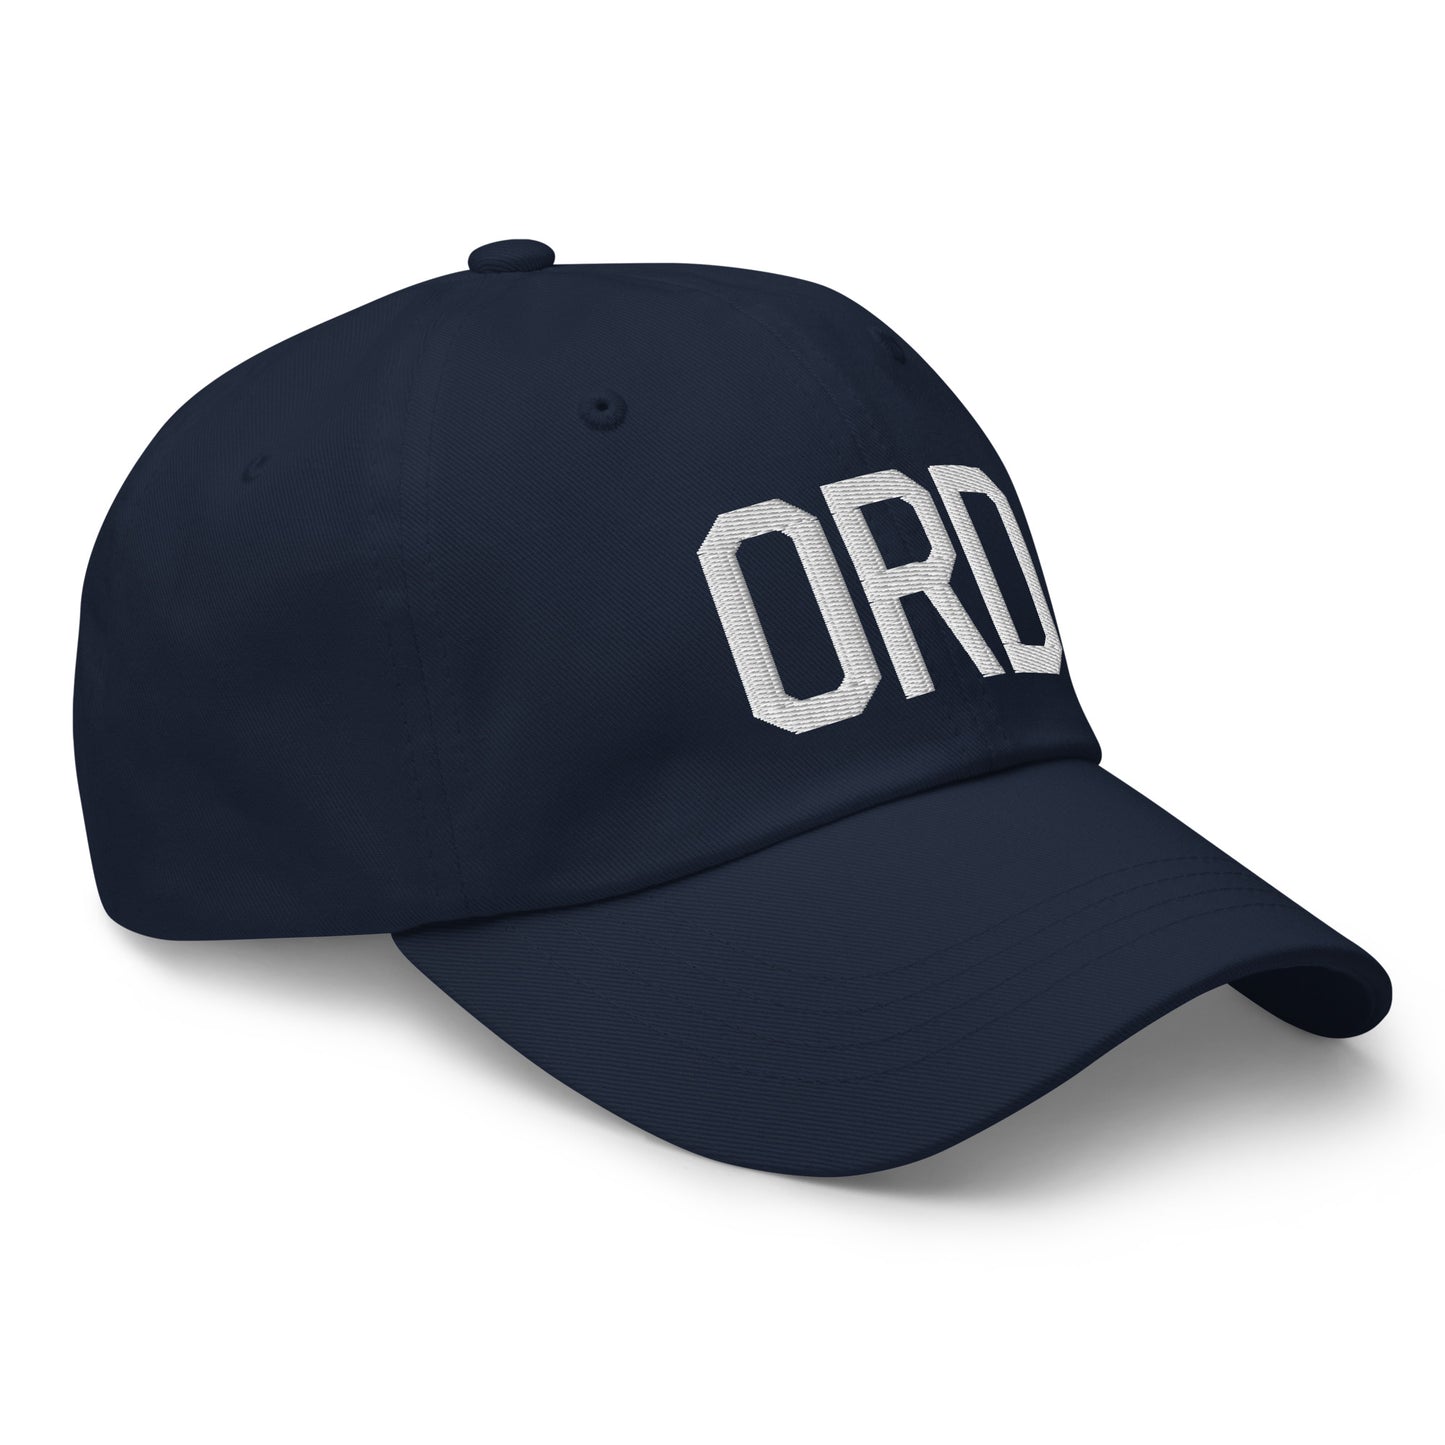 Airport Code Baseball Cap - White • ORD Chicago • YHM Designs - Image 17